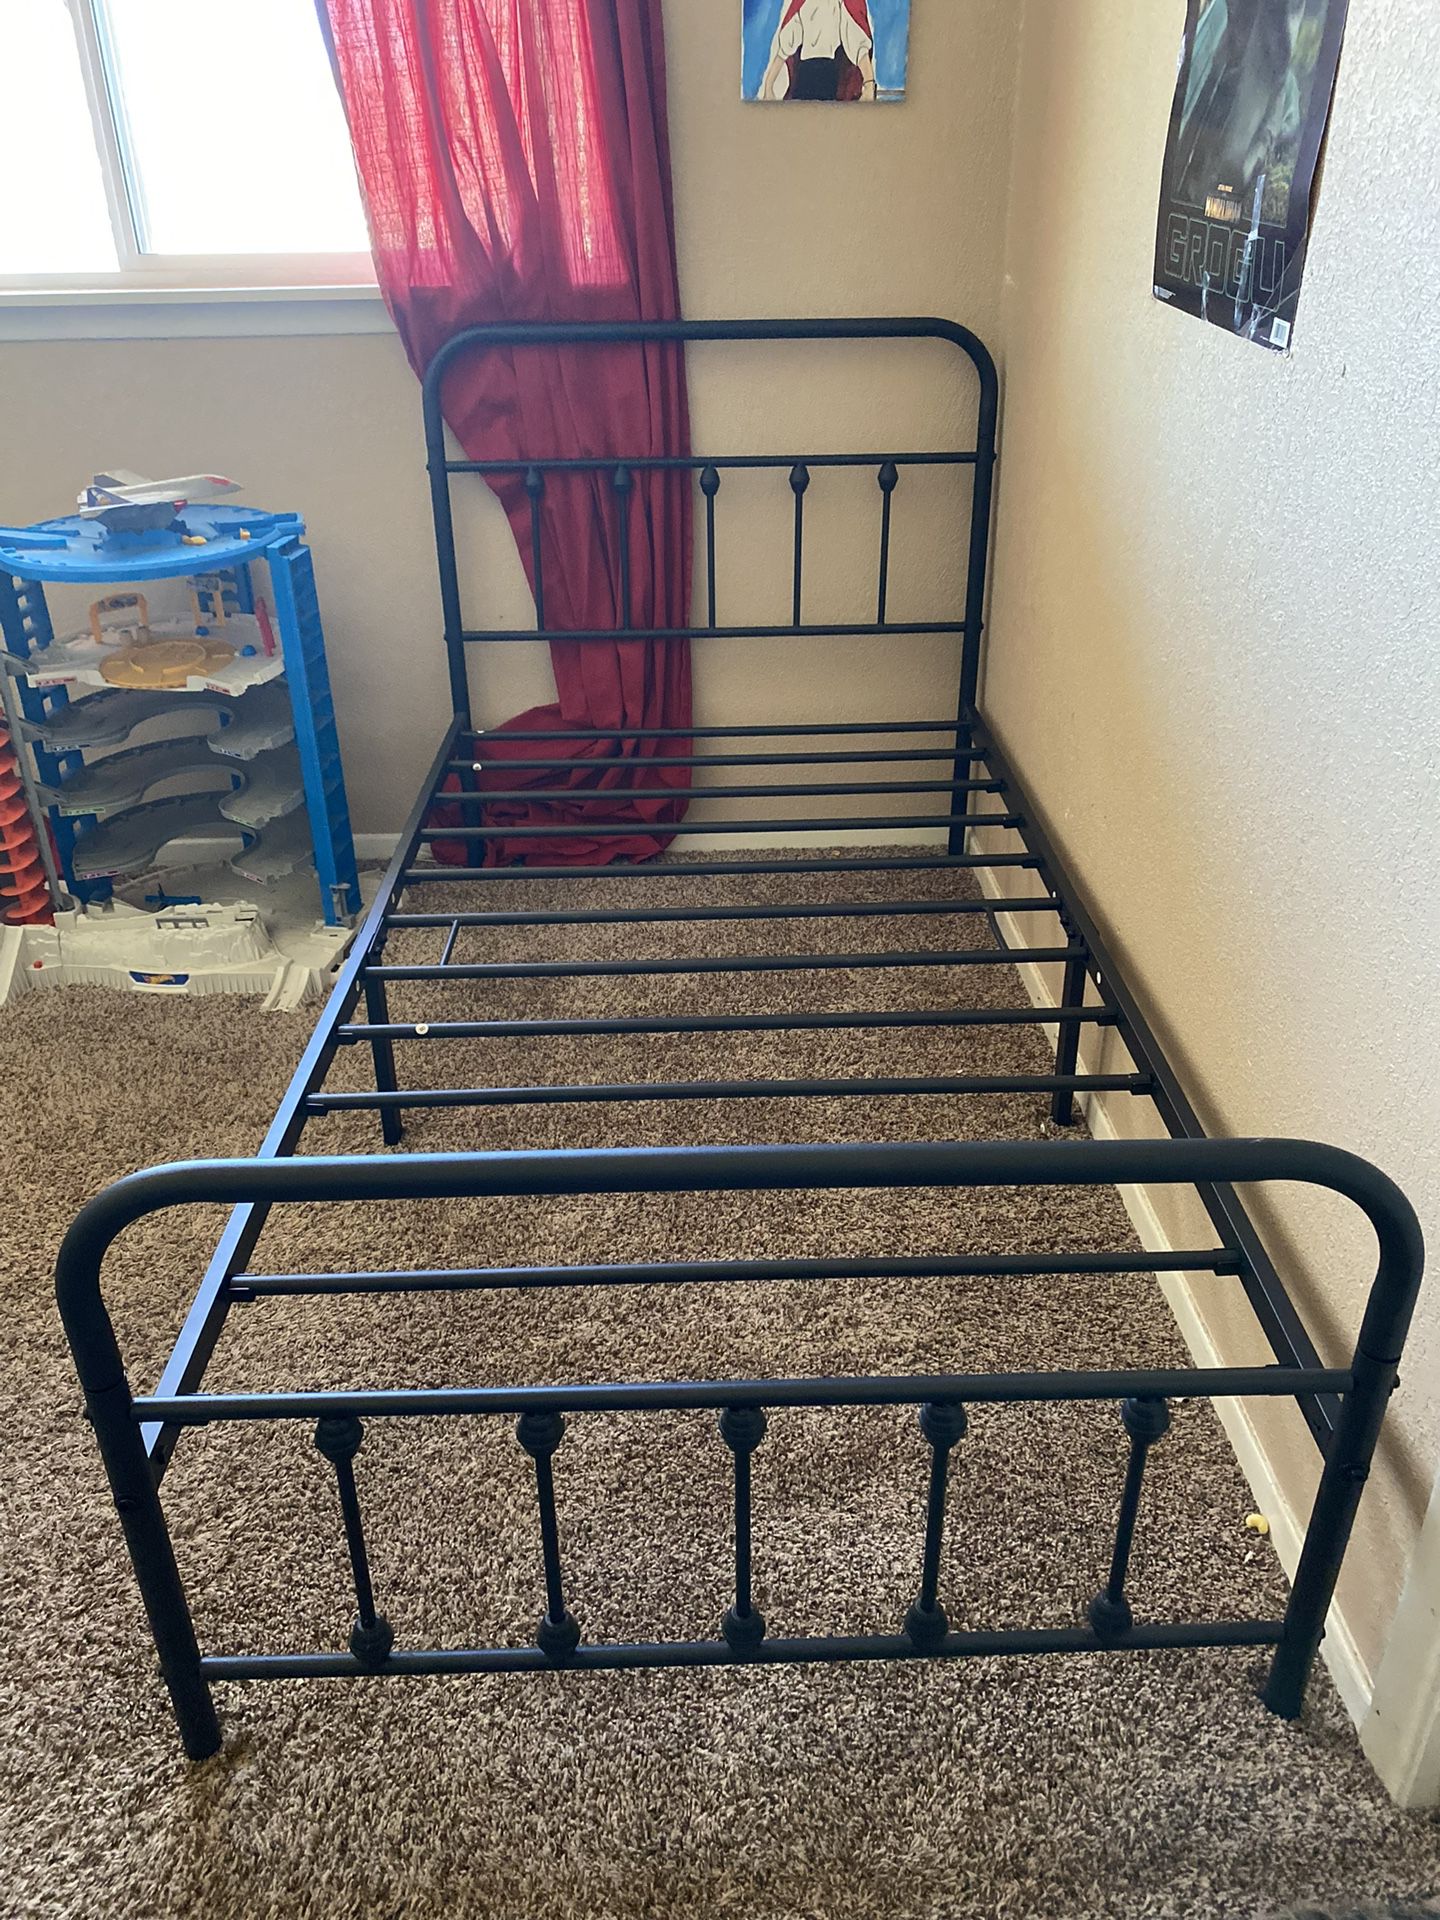 Sobrecamas King Size 5 Pc Set for Sale in Fort Bliss, TX - OfferUp